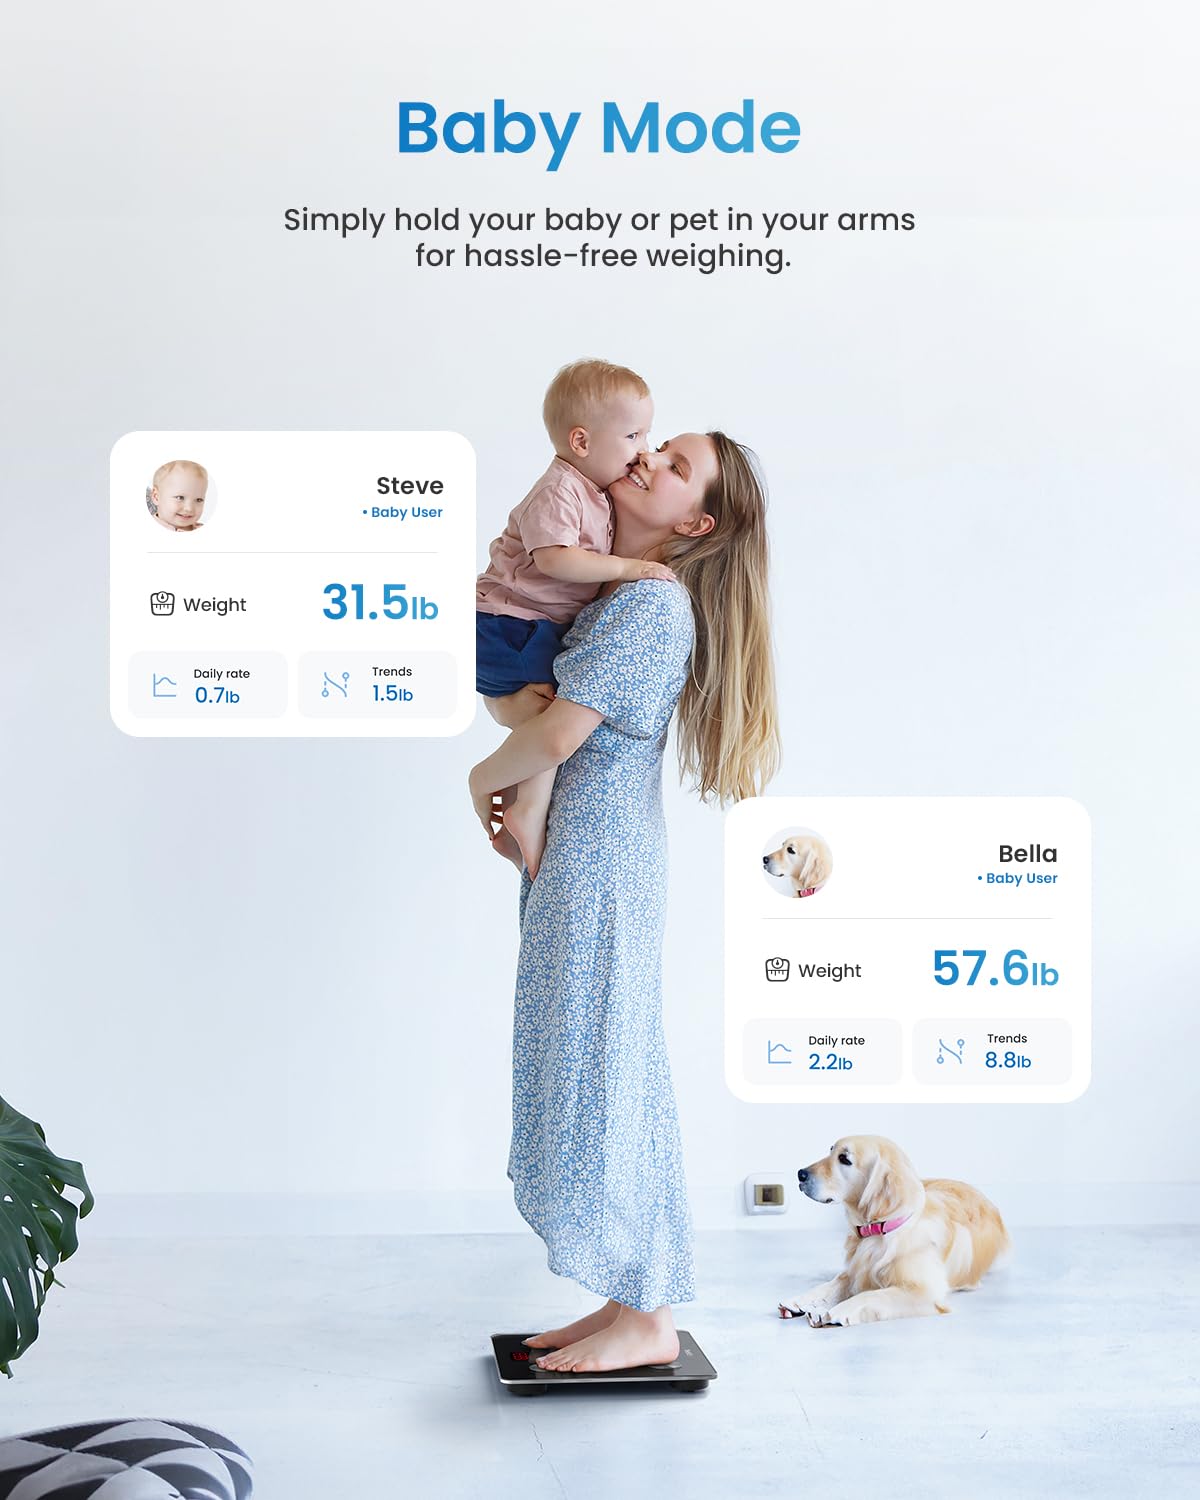 Advertisement showing a mother kissing her toddler, both Caucasian, next to a Renpho Elis 1 Smart Body Scale's digital display featuring a baby and a dog with their body composition analysis. There is a dog lying on the floor.